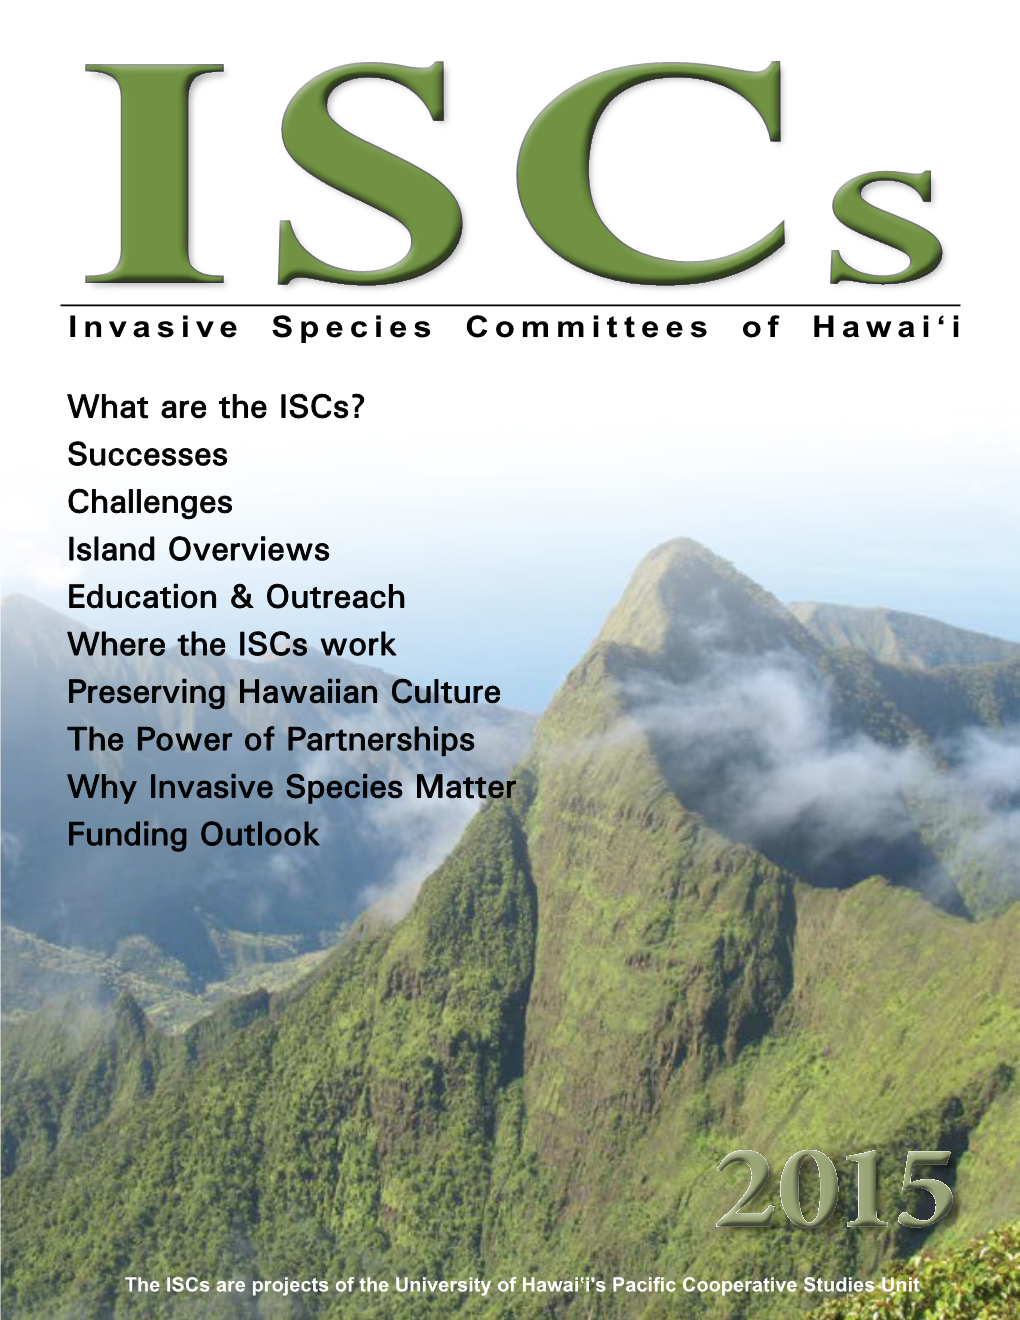 What Are the Iscs?